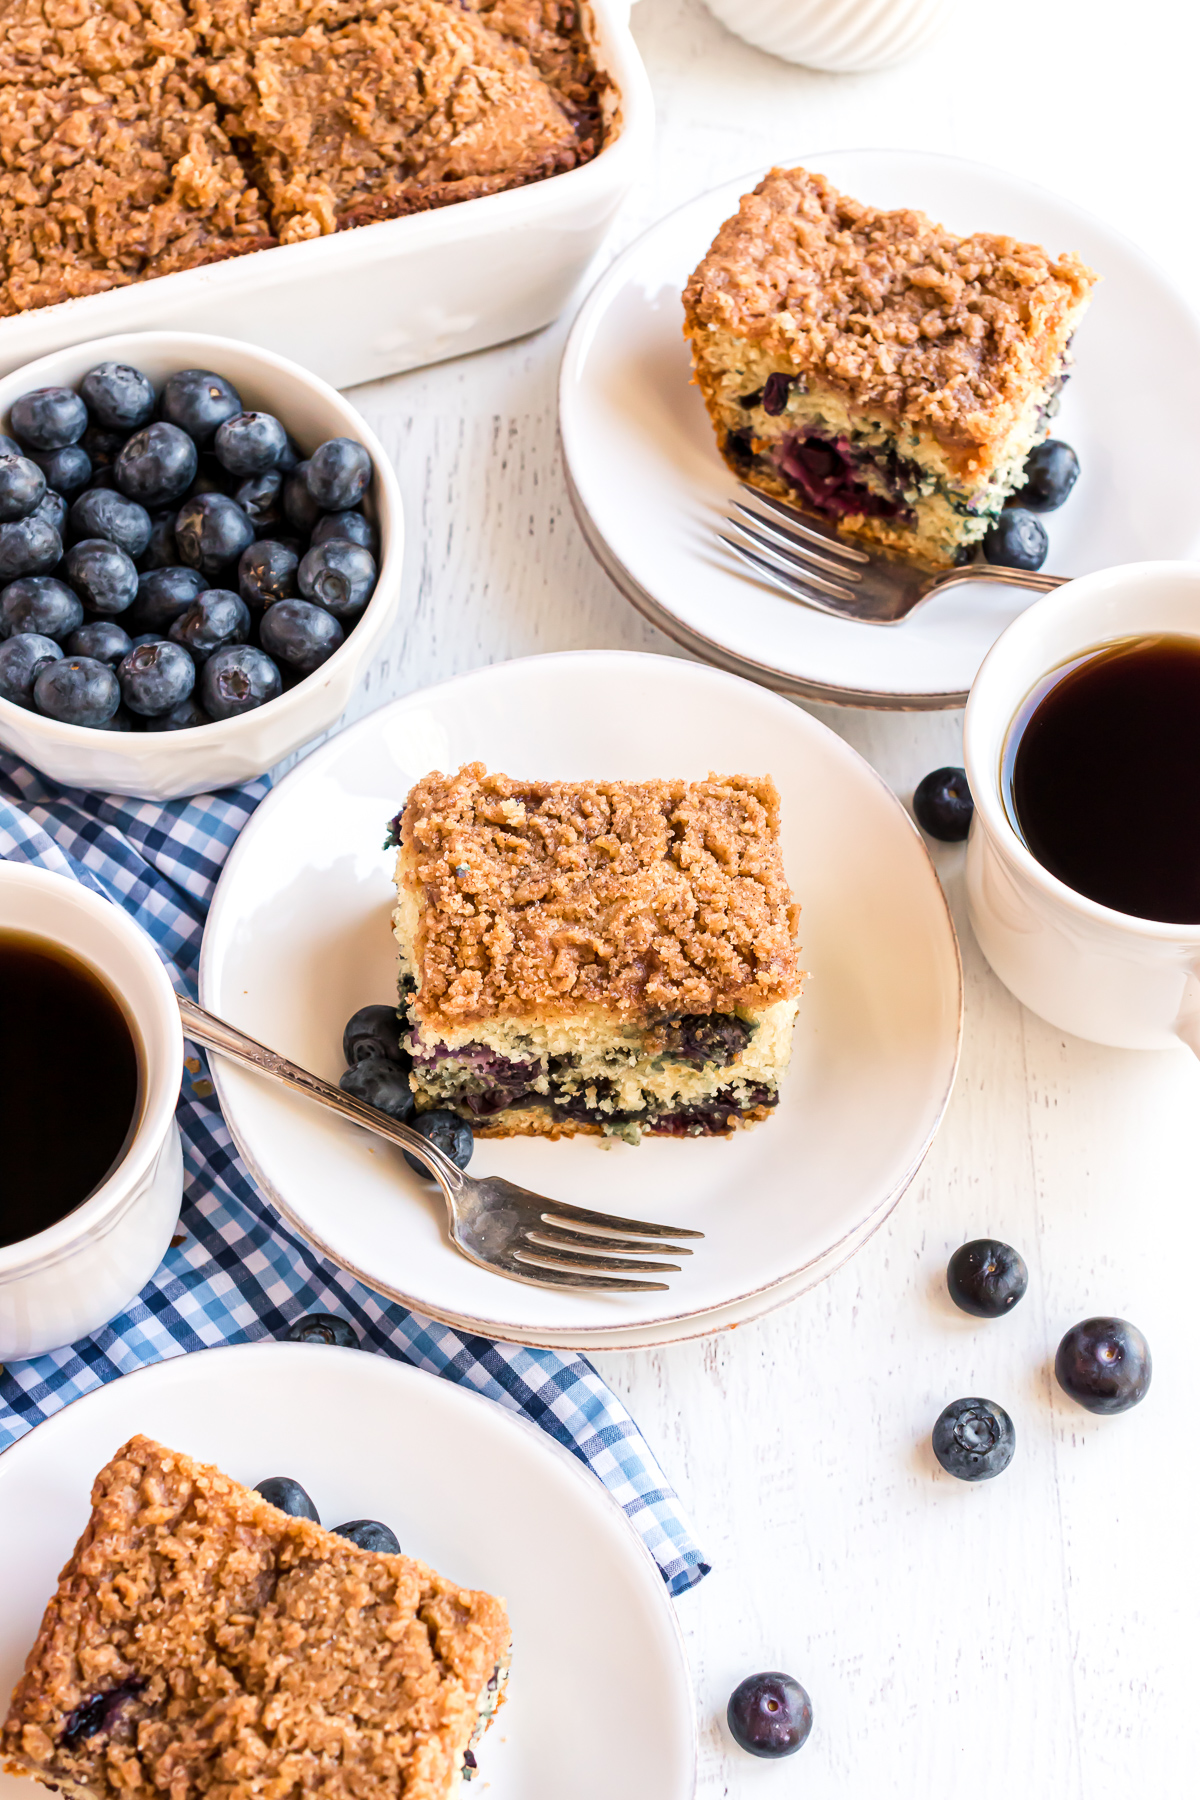 There are 3 pieces of blueberry dessert cake served on individual plates. They are surrounded by fresh blueberries on each plate and cups of coffee.